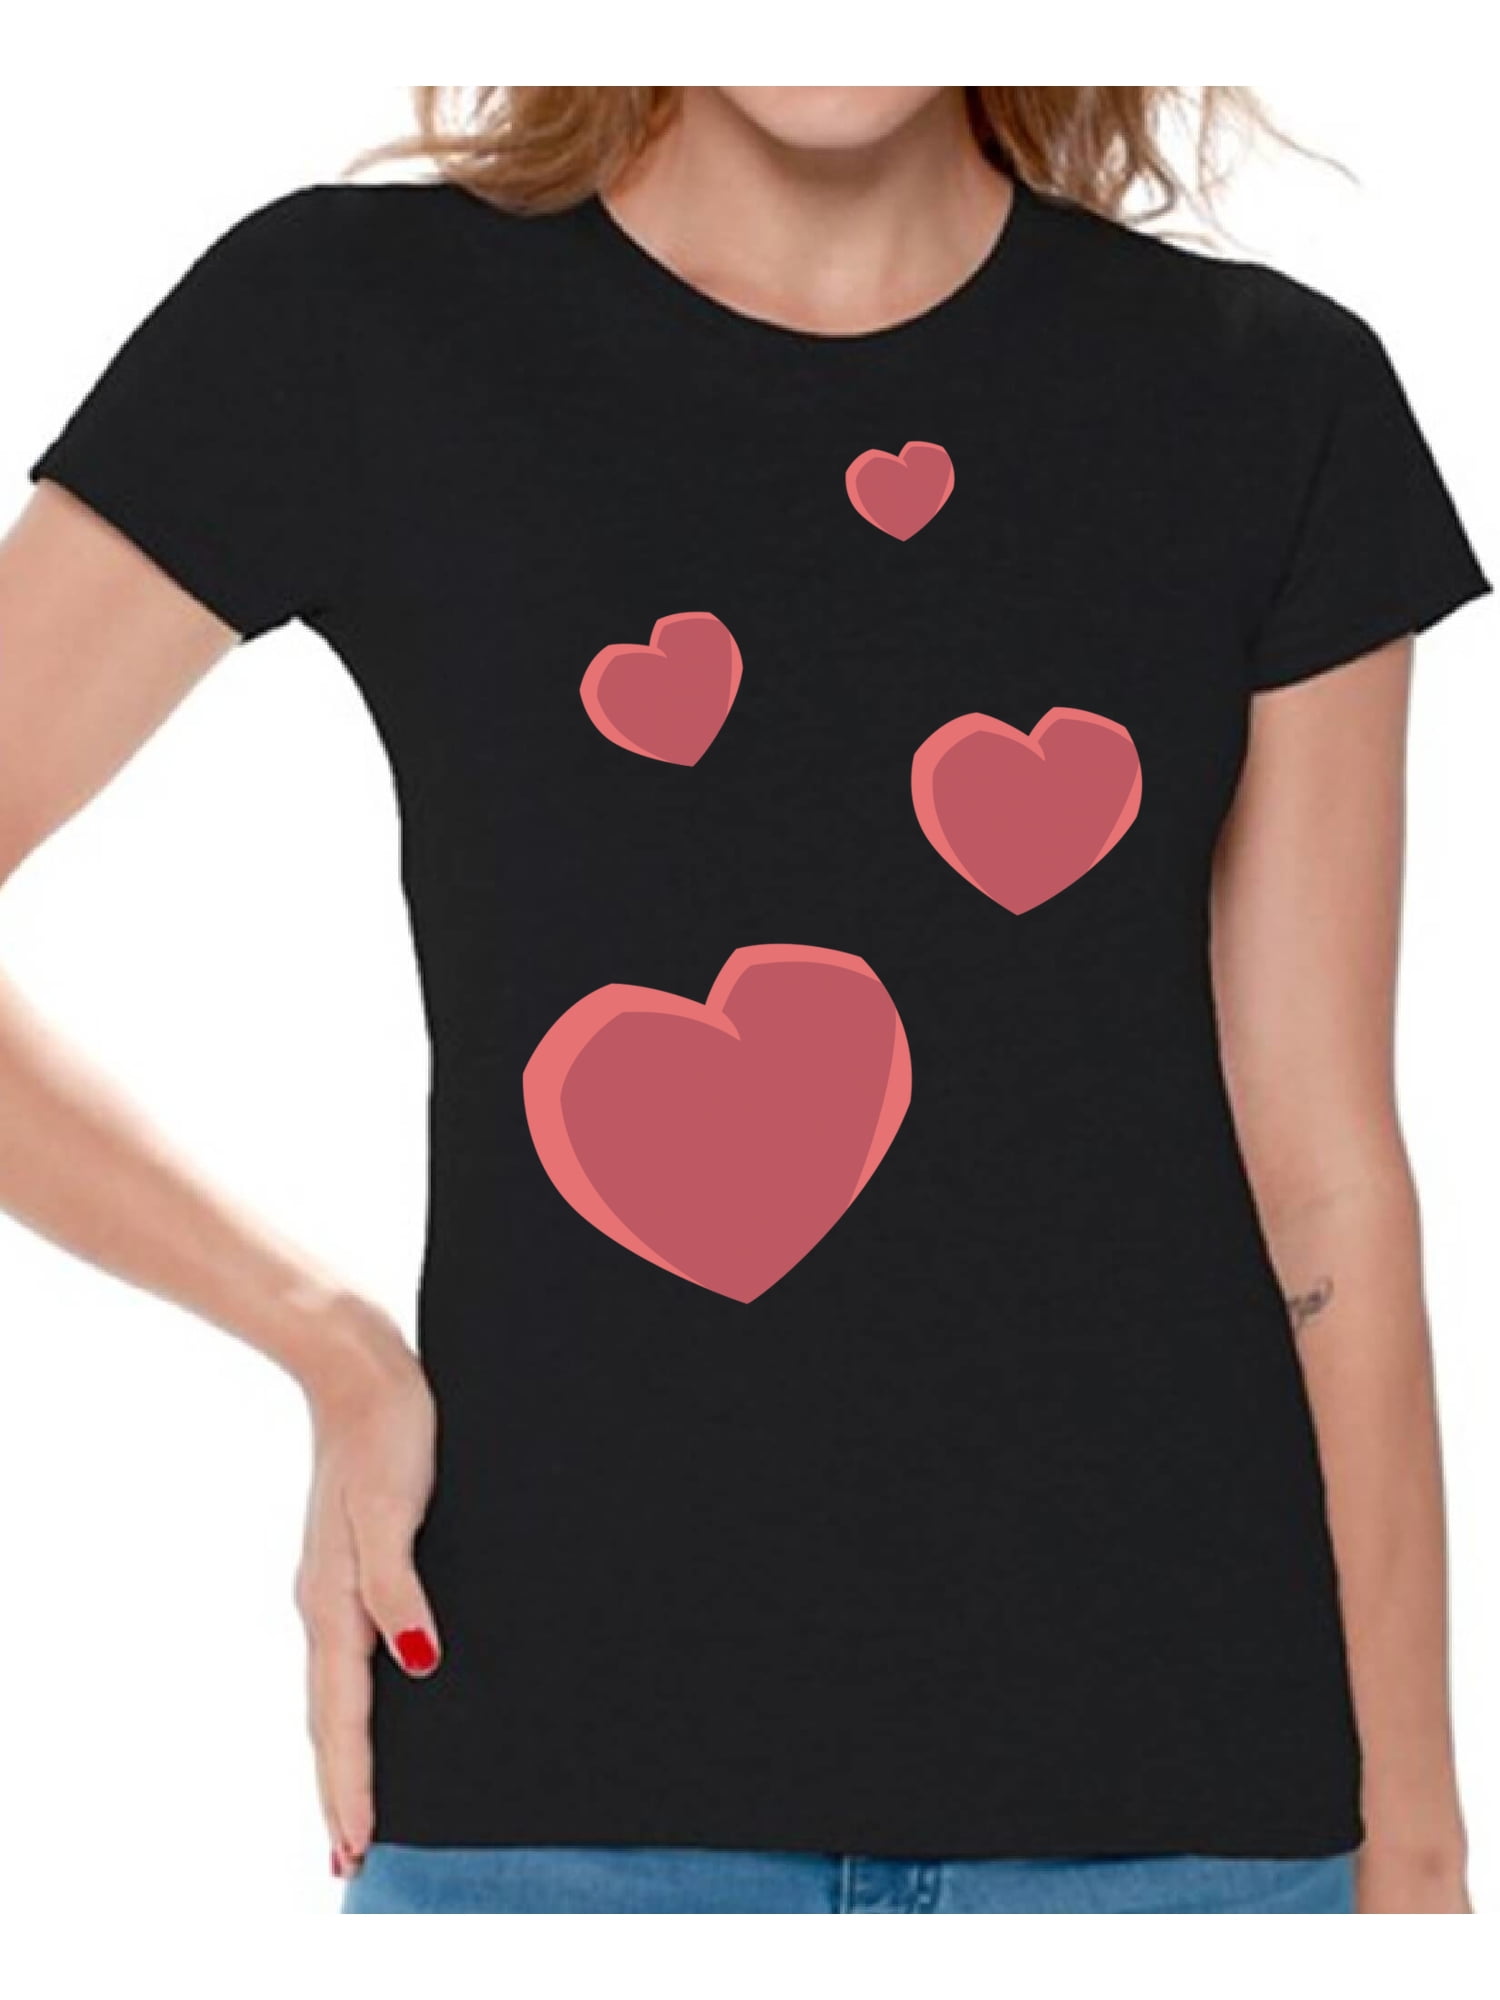 Awkward Styles Valentine's T-Shirt Red Hearts T Shirts for Women Love ...